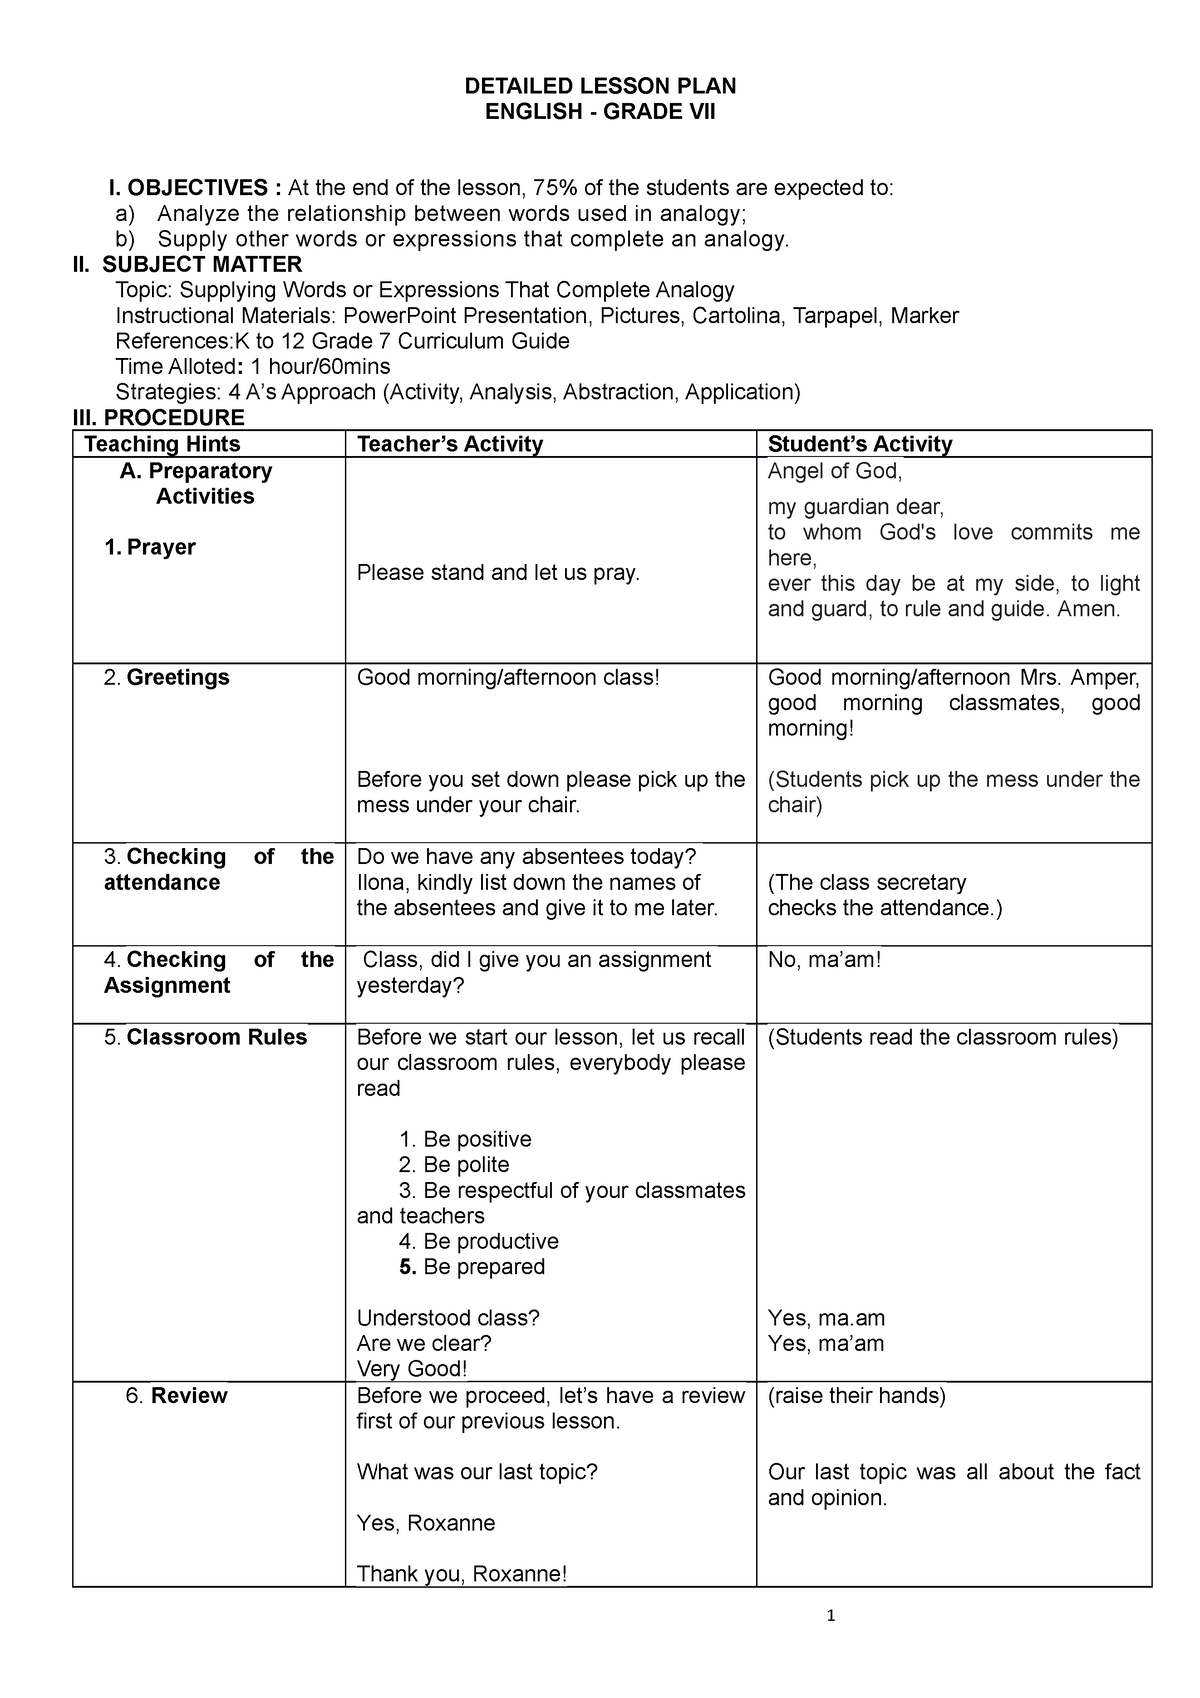 Supplying Words Or Expressions That Complete Analogy Detailed Lesson Plan English Grade Vii 0450